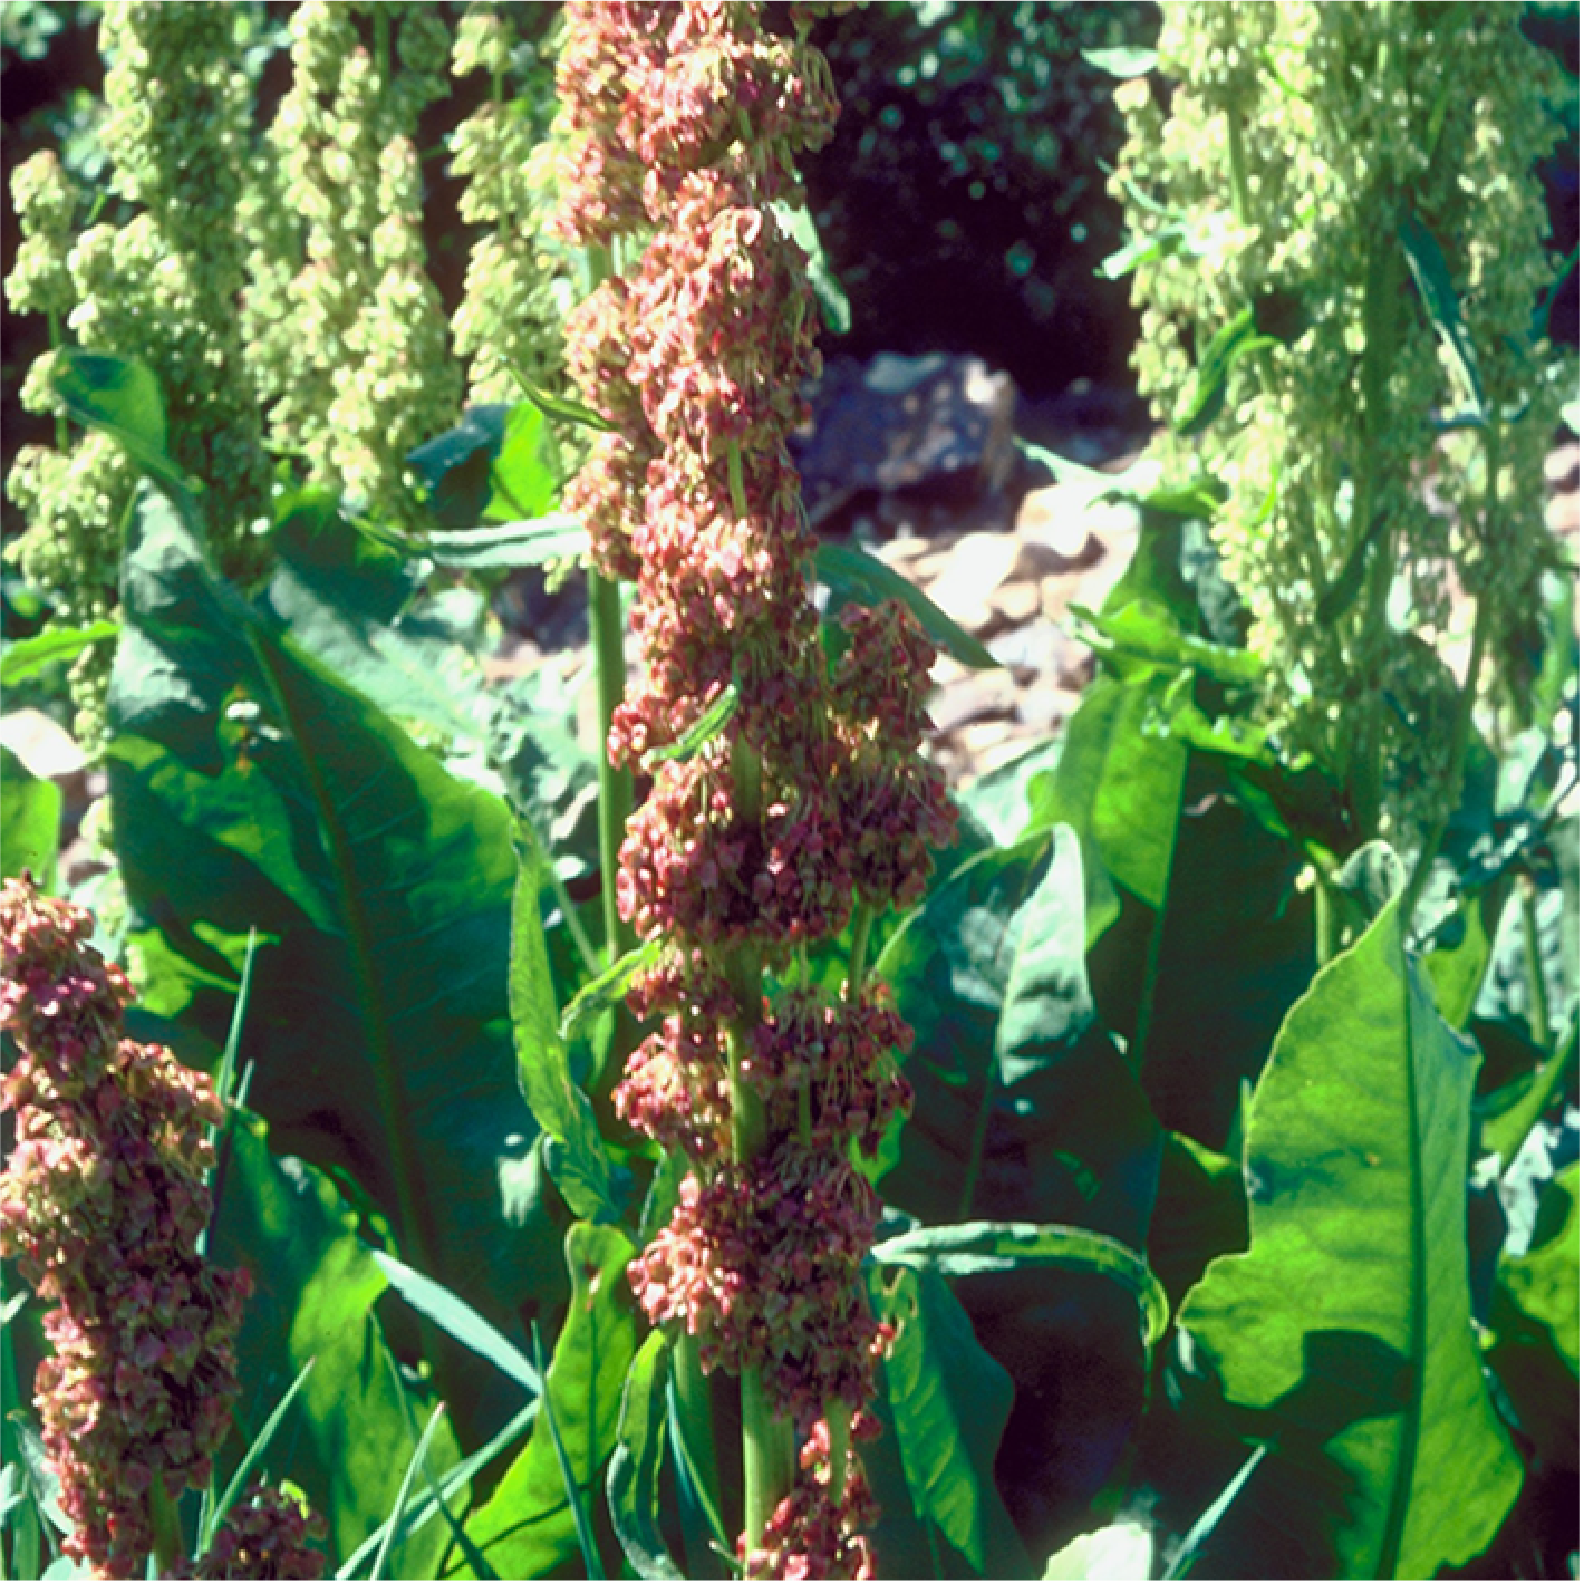 A long plant stalk covered in seeds with large erect leaves coming from the bottom